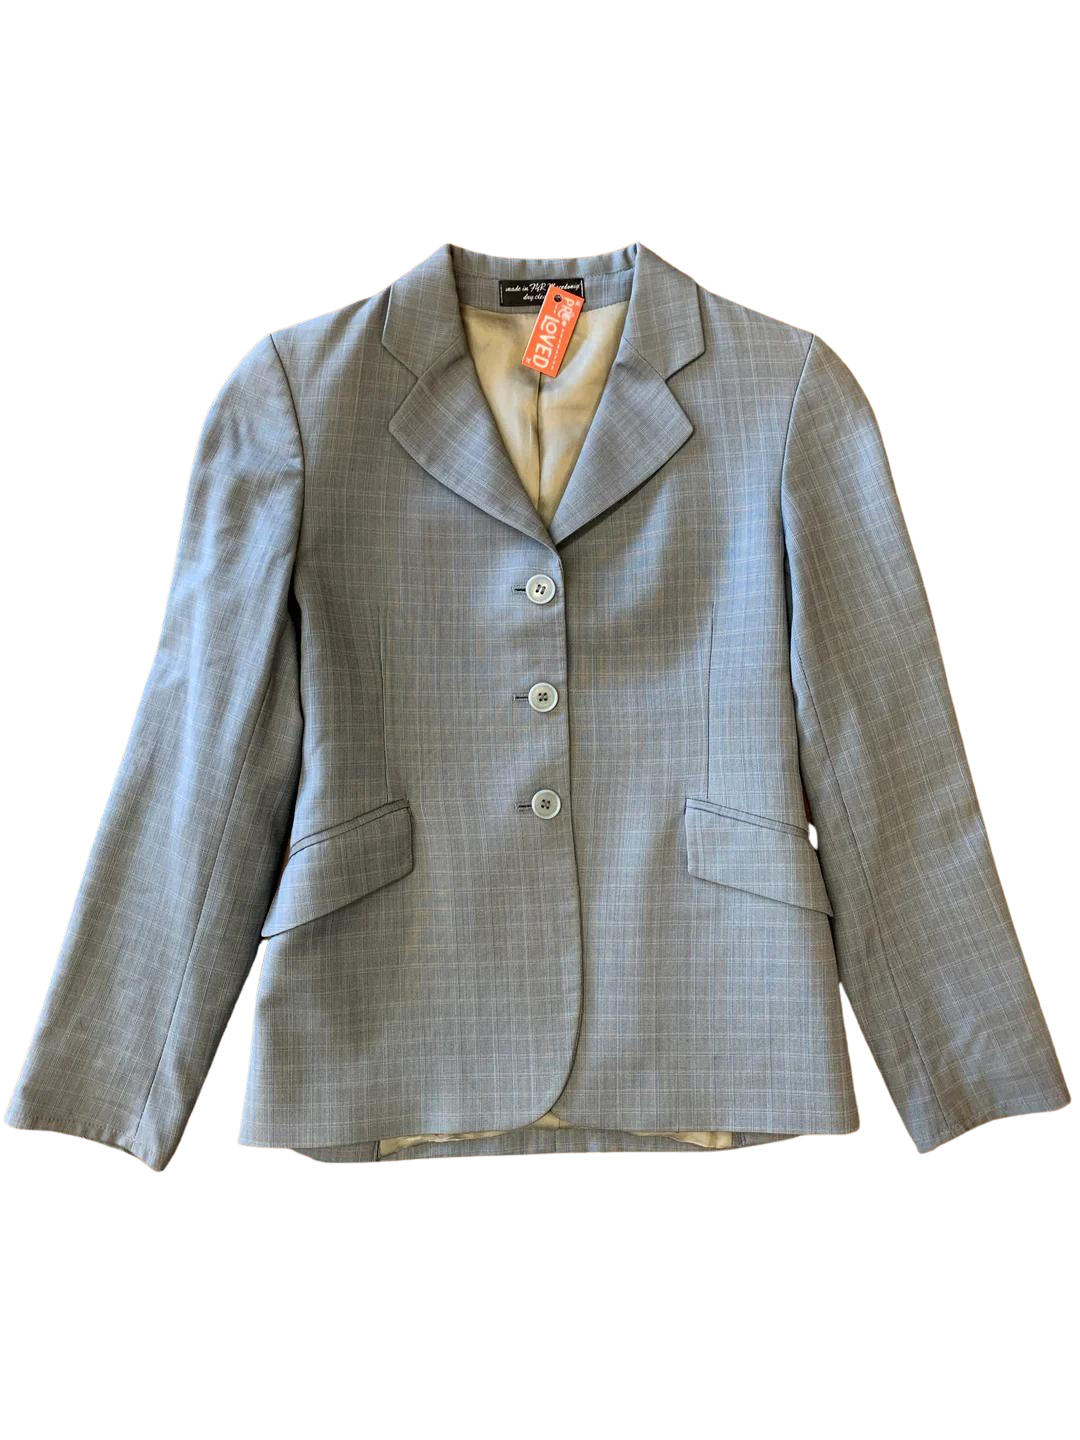 PRE-LOVED RJ CLASSIC PLATINUM YOUTH SHOW COAT